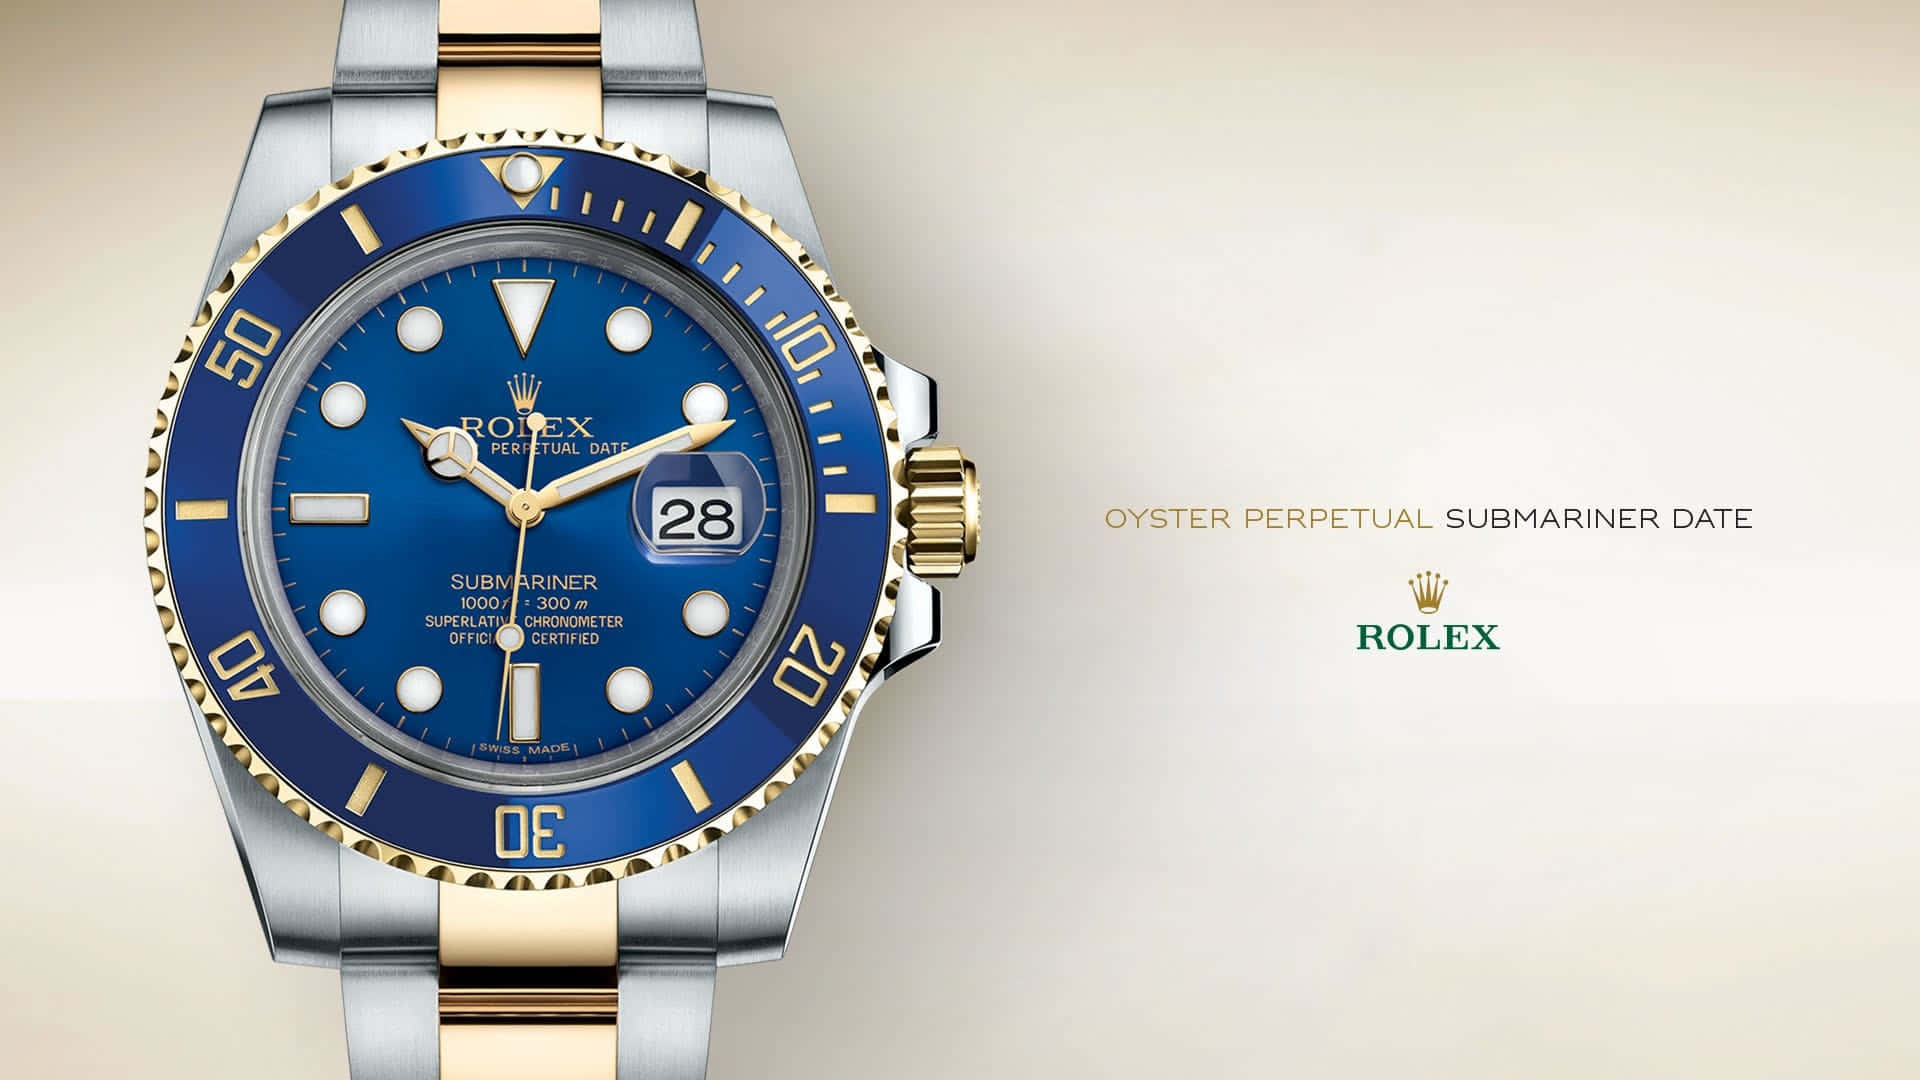 Rolex Oyster Perpetual Submariner Date Watch Wallpaper